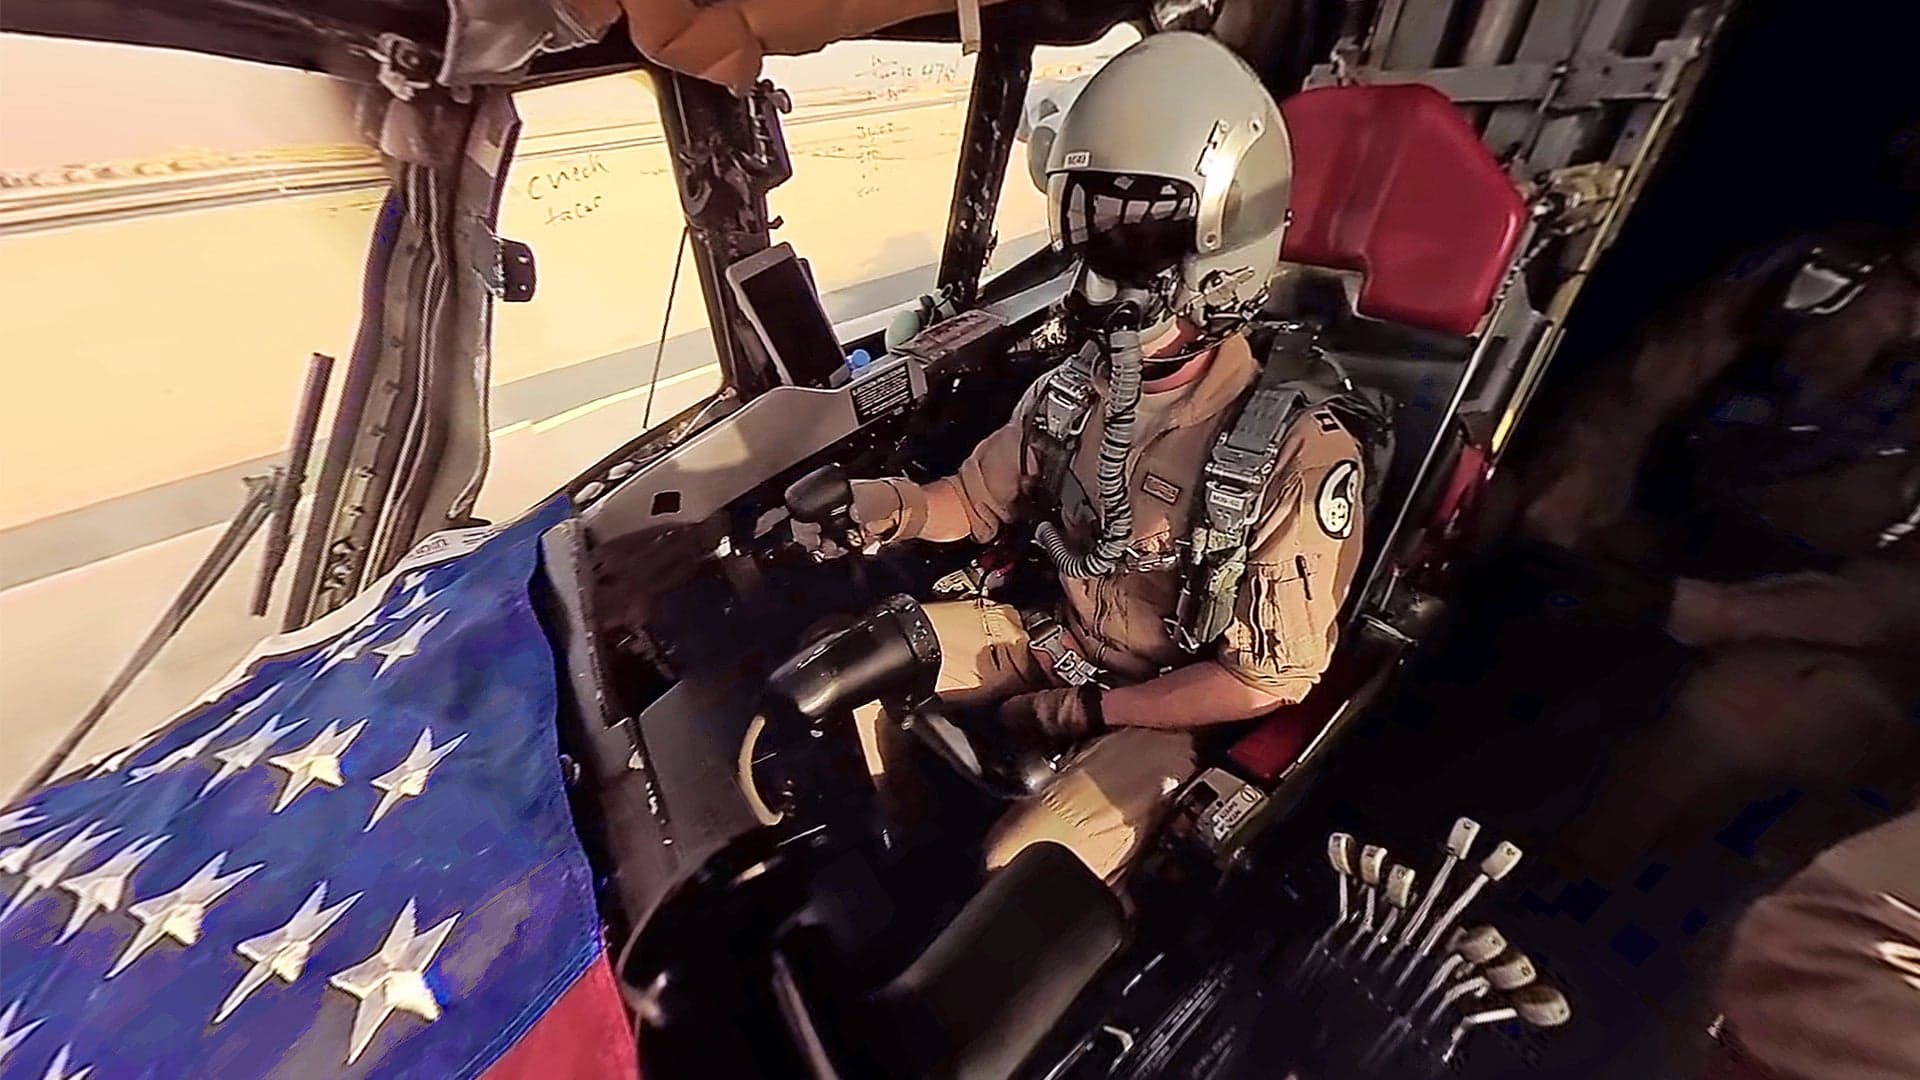 Watch These Pilots Wrangle Their B-52 Onto The Runway In This Awesome 360 Video